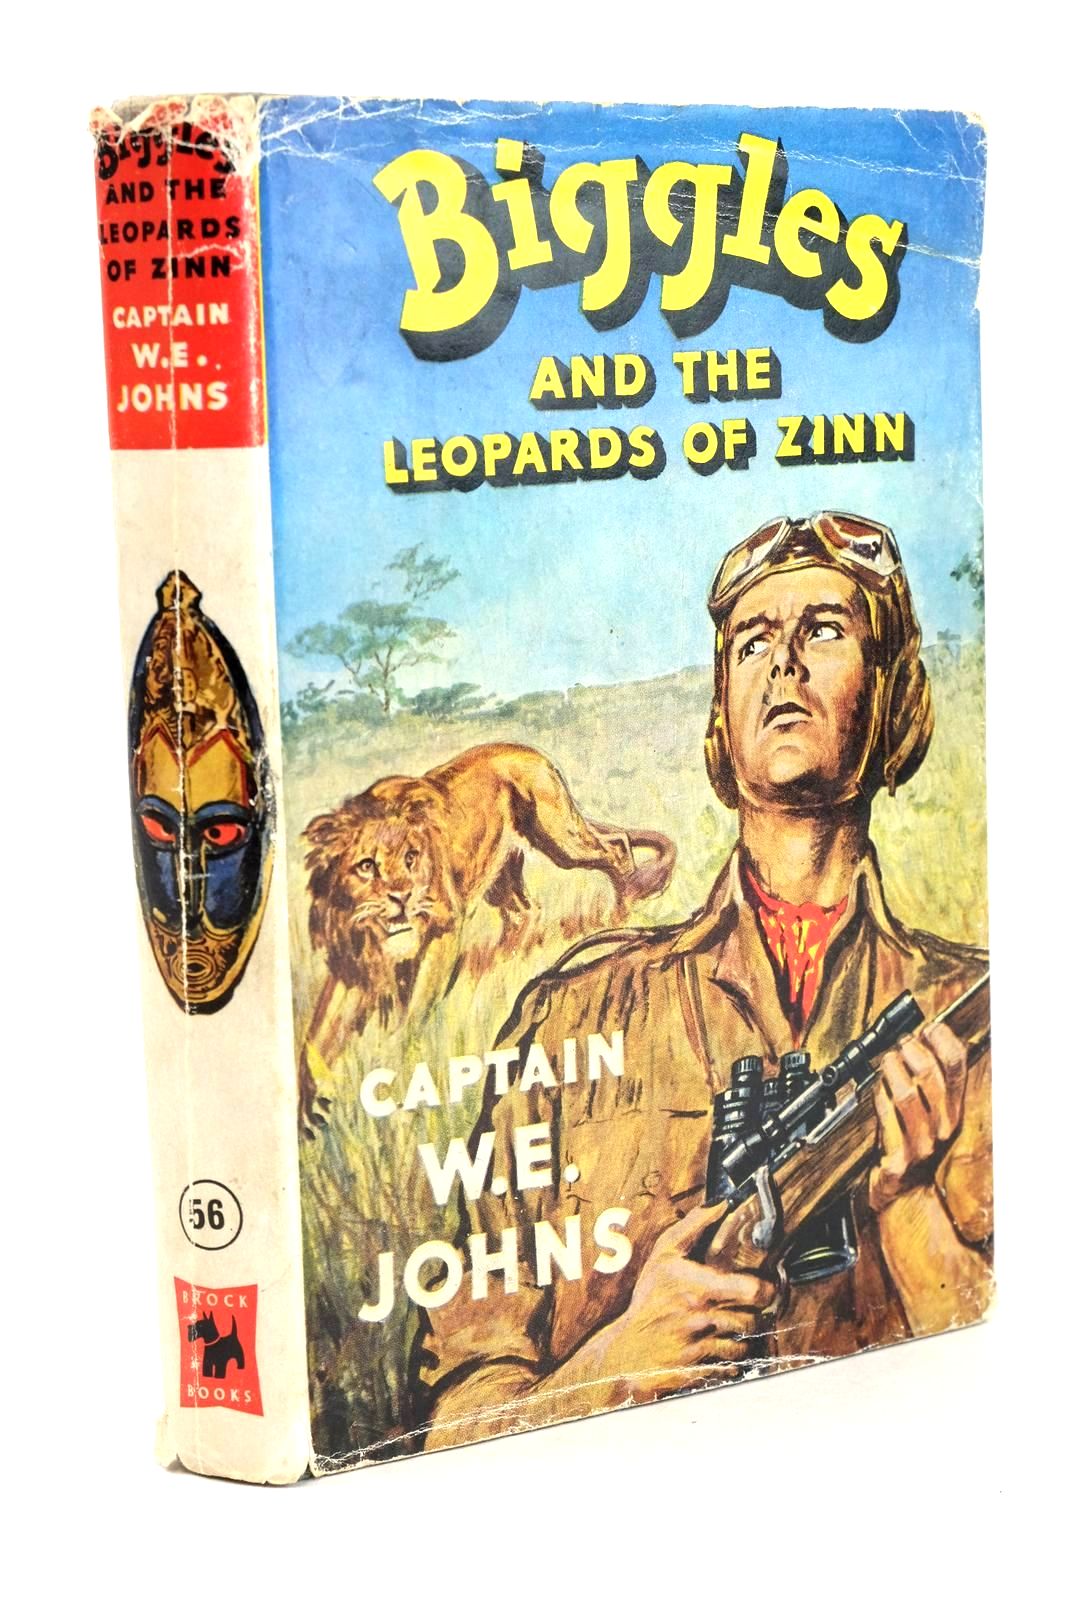 Photo of BIGGLES AND THE LEOPARDS OF ZINN written by Johns, W.E. illustrated by Stead, Leslie published by Brockhampton Press (STOCK CODE: 1326193)  for sale by Stella & Rose's Books